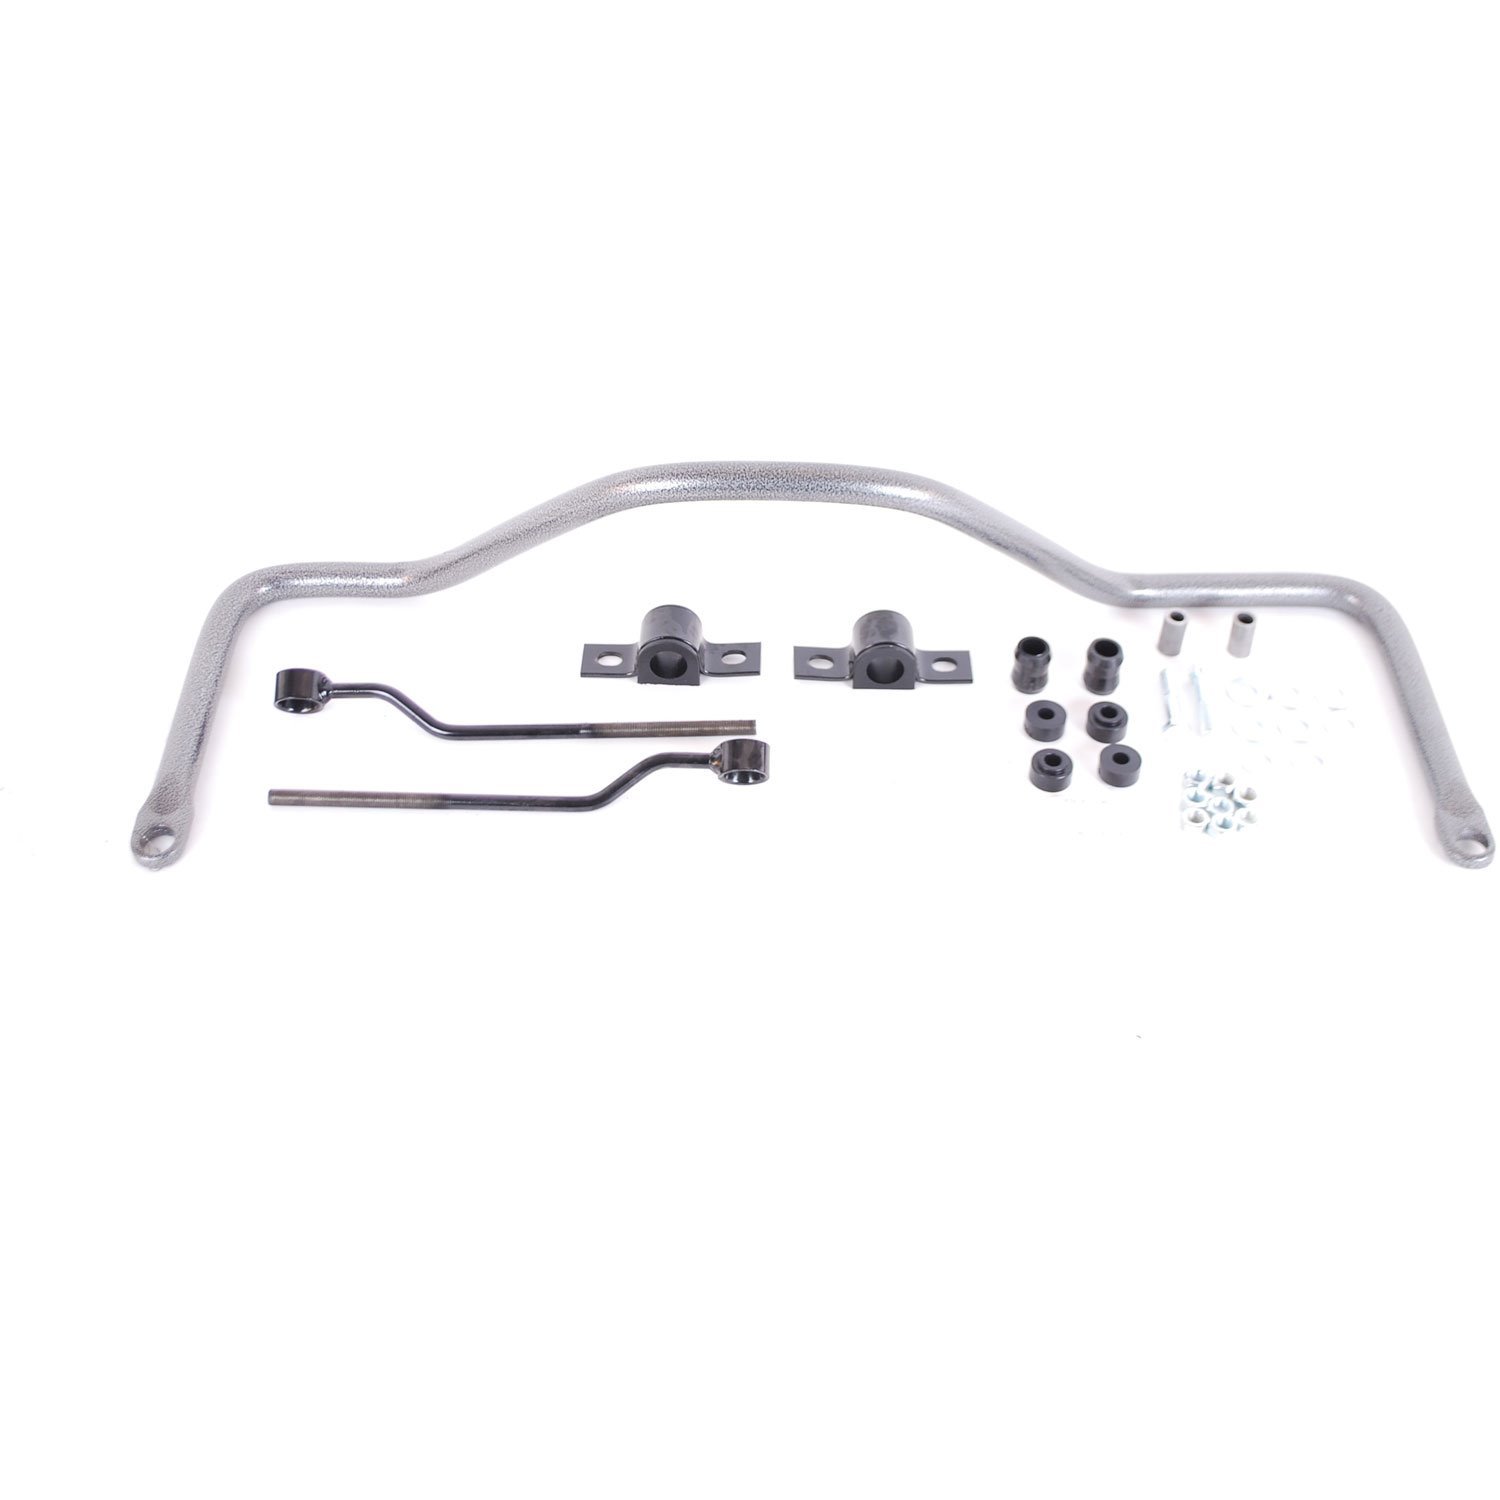 Rear Sway Bar for 1999-2004 Ford F-350 Dually 2/4WD and 2005-2007 F-350 Dually 2WD